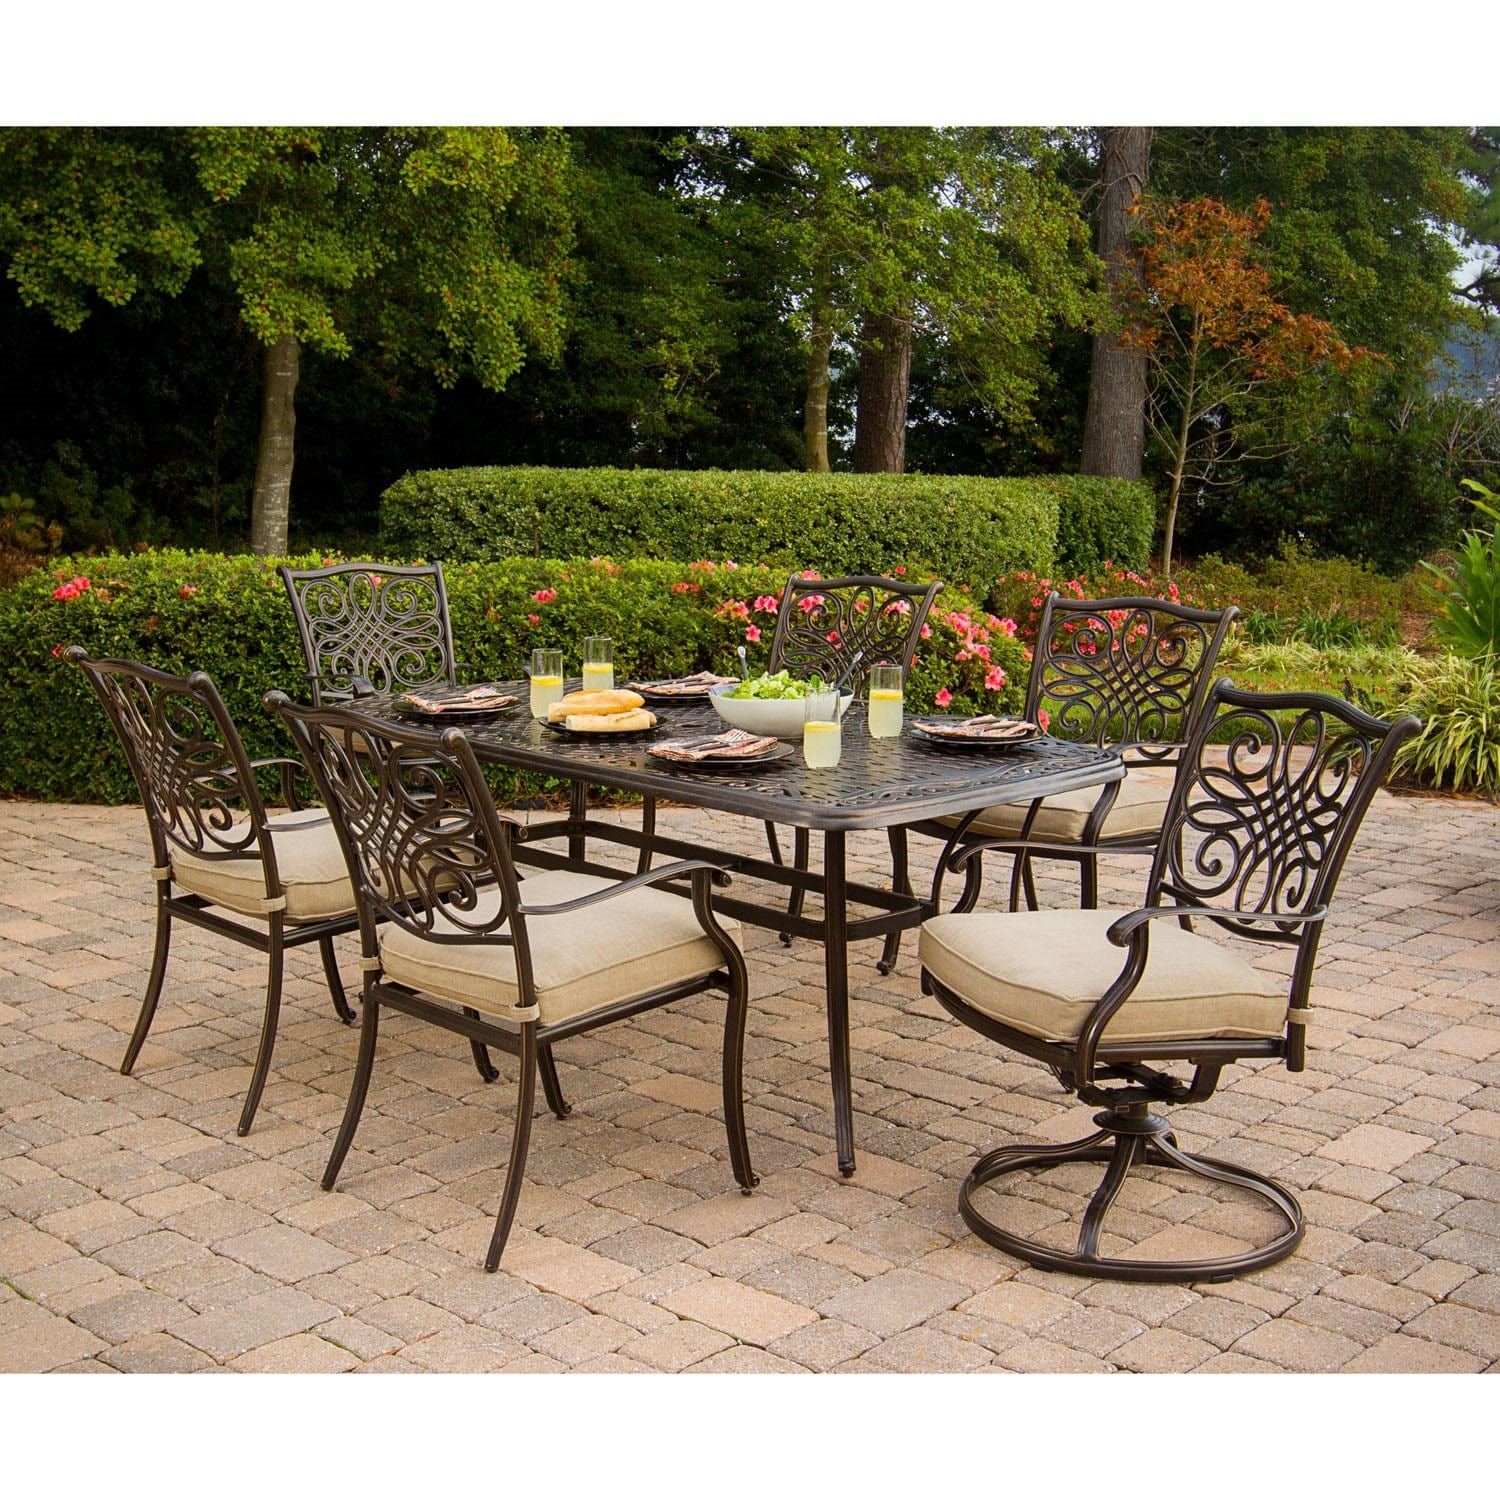 Hanover Outdoor Dining Set Hanover - Traditions 7 Pc. Outdoor Dining Set of Four Dining Chairs, Two Swivel Chairs, Dining Table, Umbrella, and Base | Aluminium Frame | Cedar | TRADITIONS7PCSW-SU